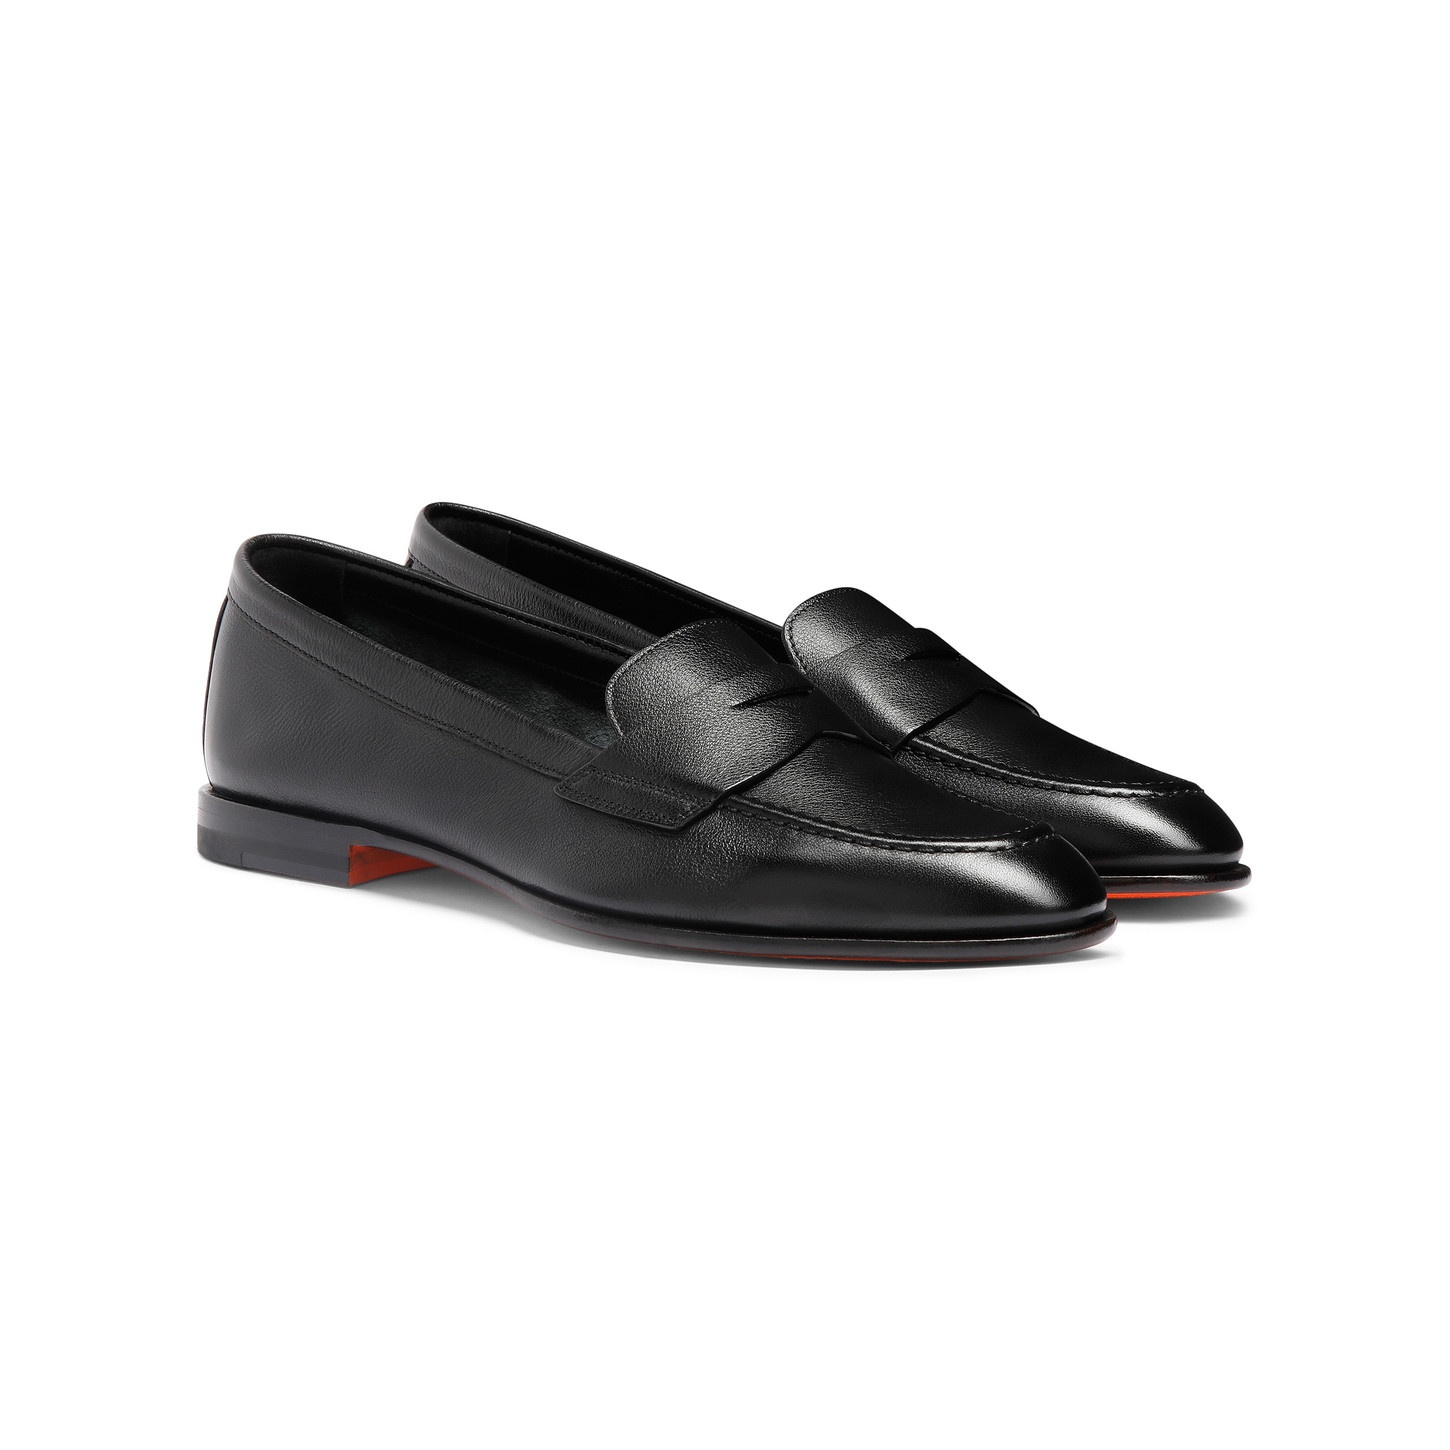 Women’s black leather penny loafer - 3